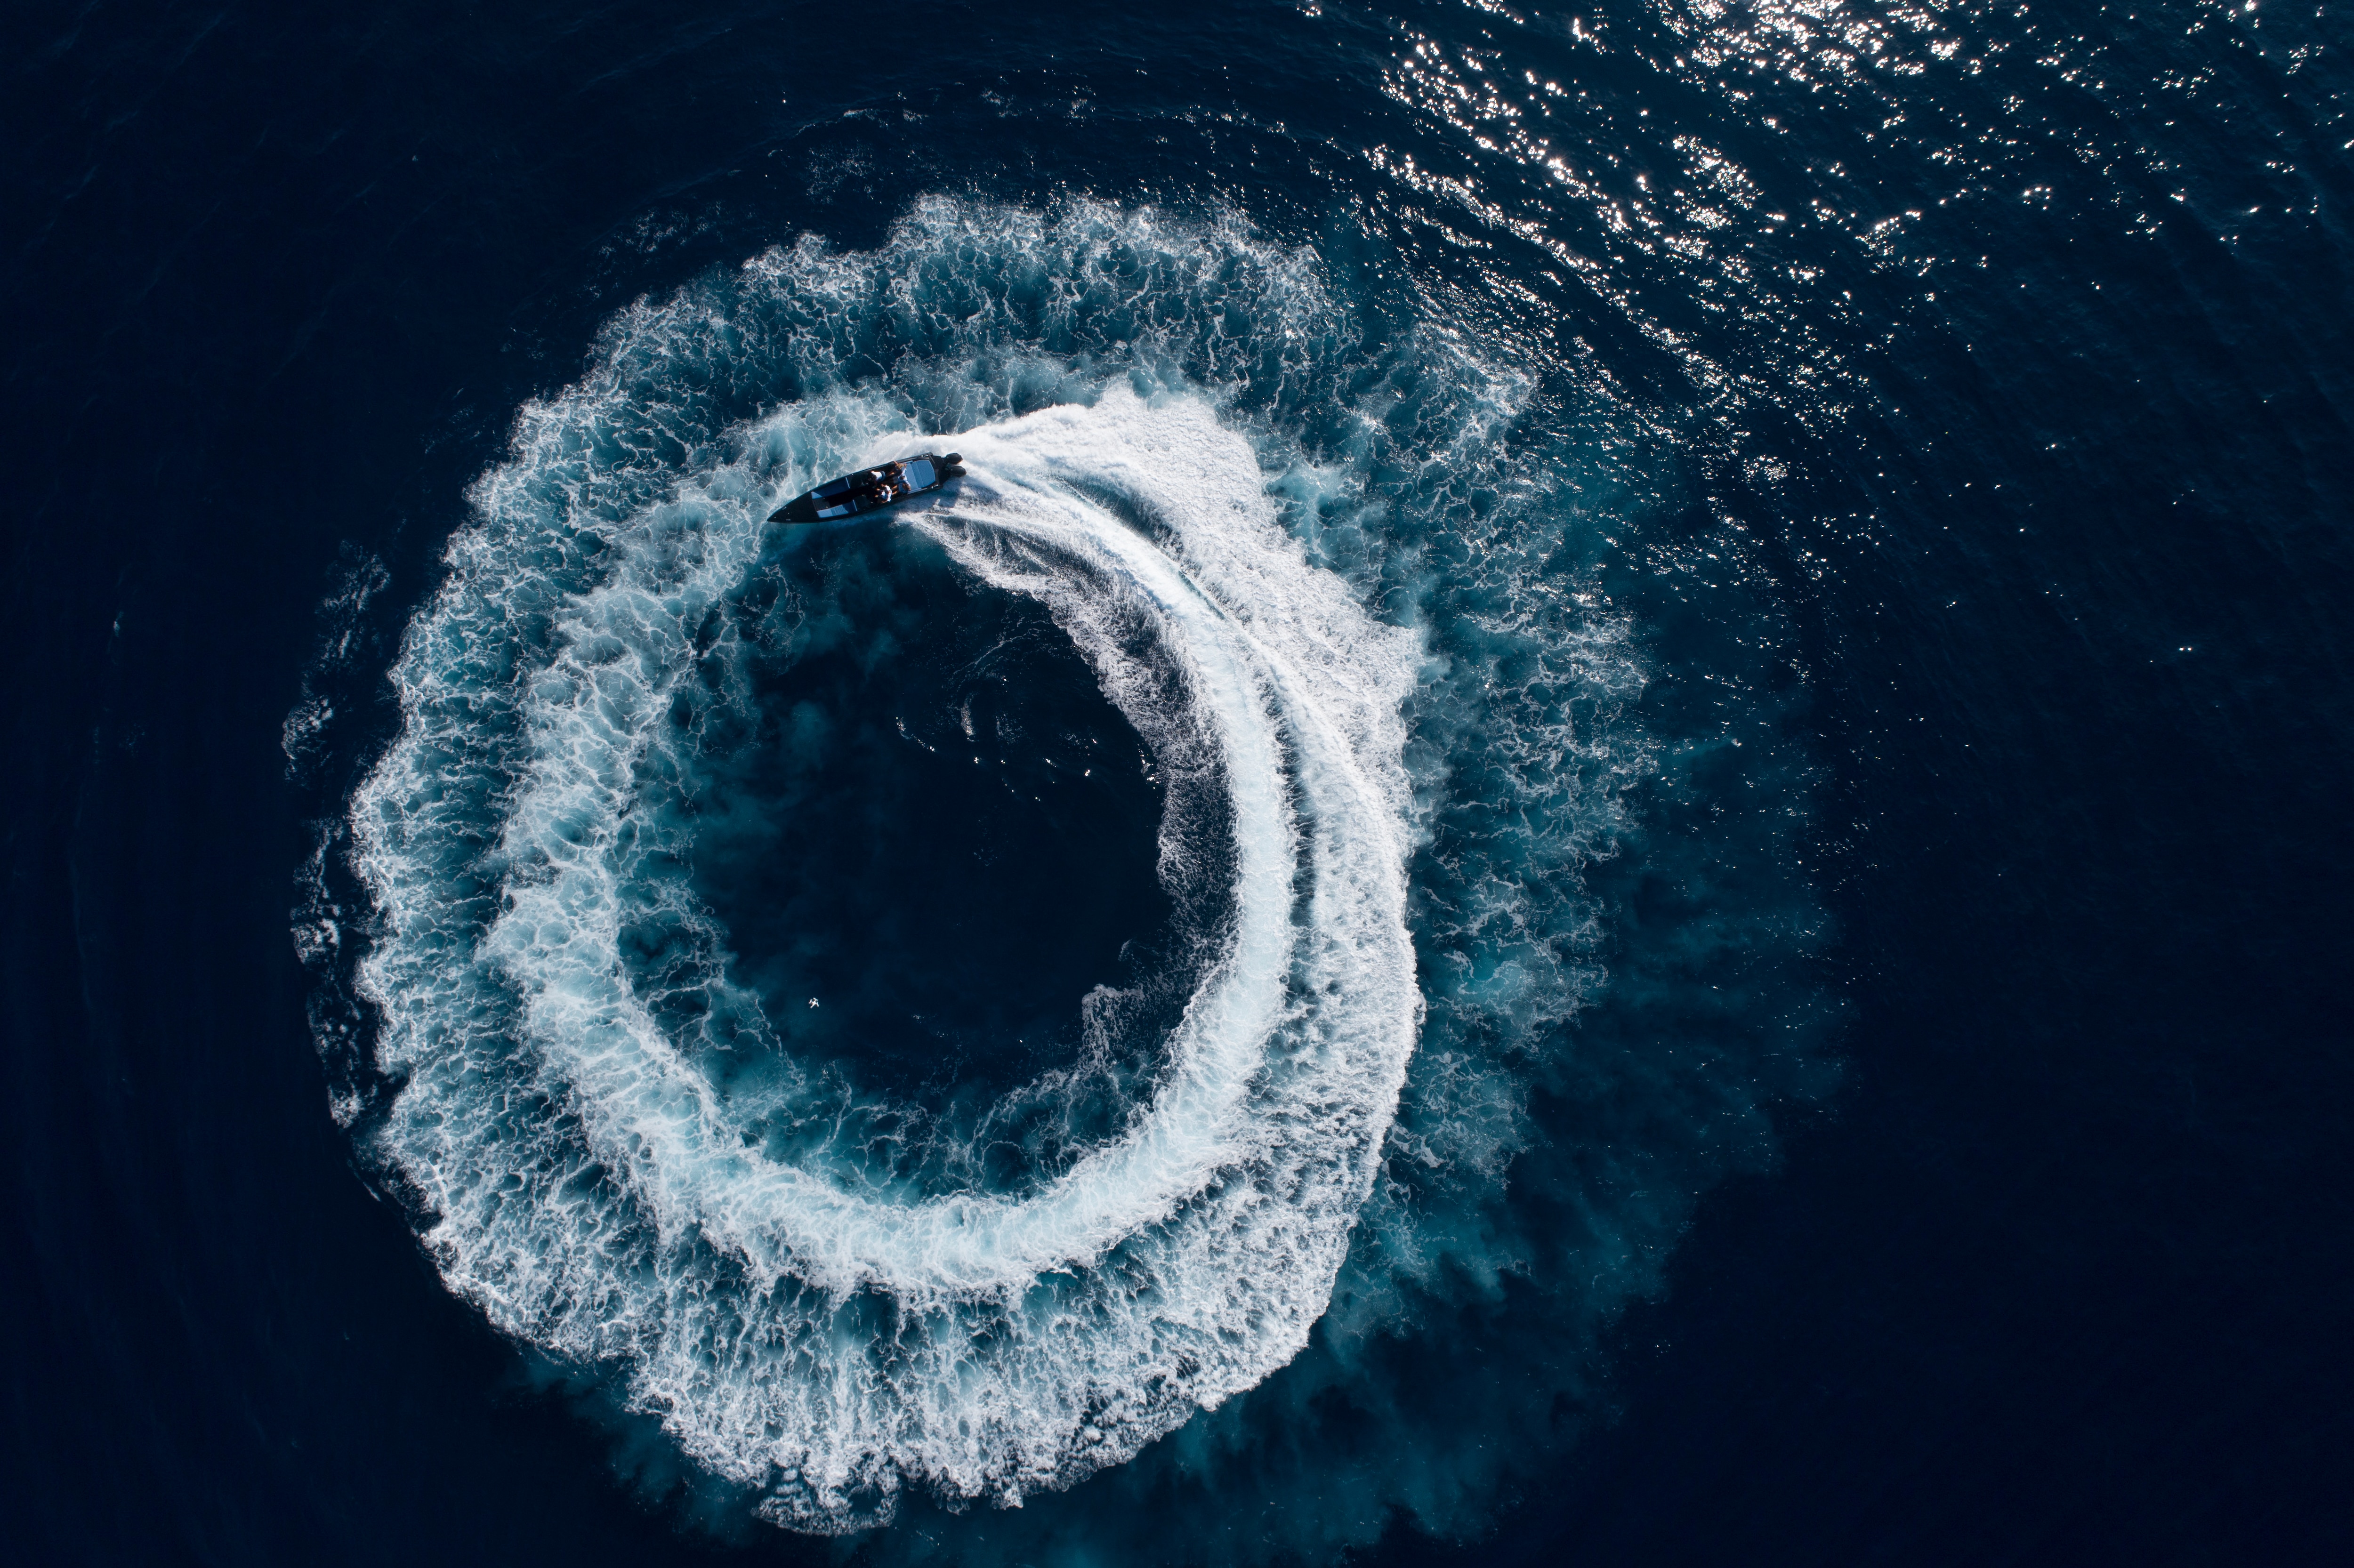 Bird view of a boat doing large circles in the watter